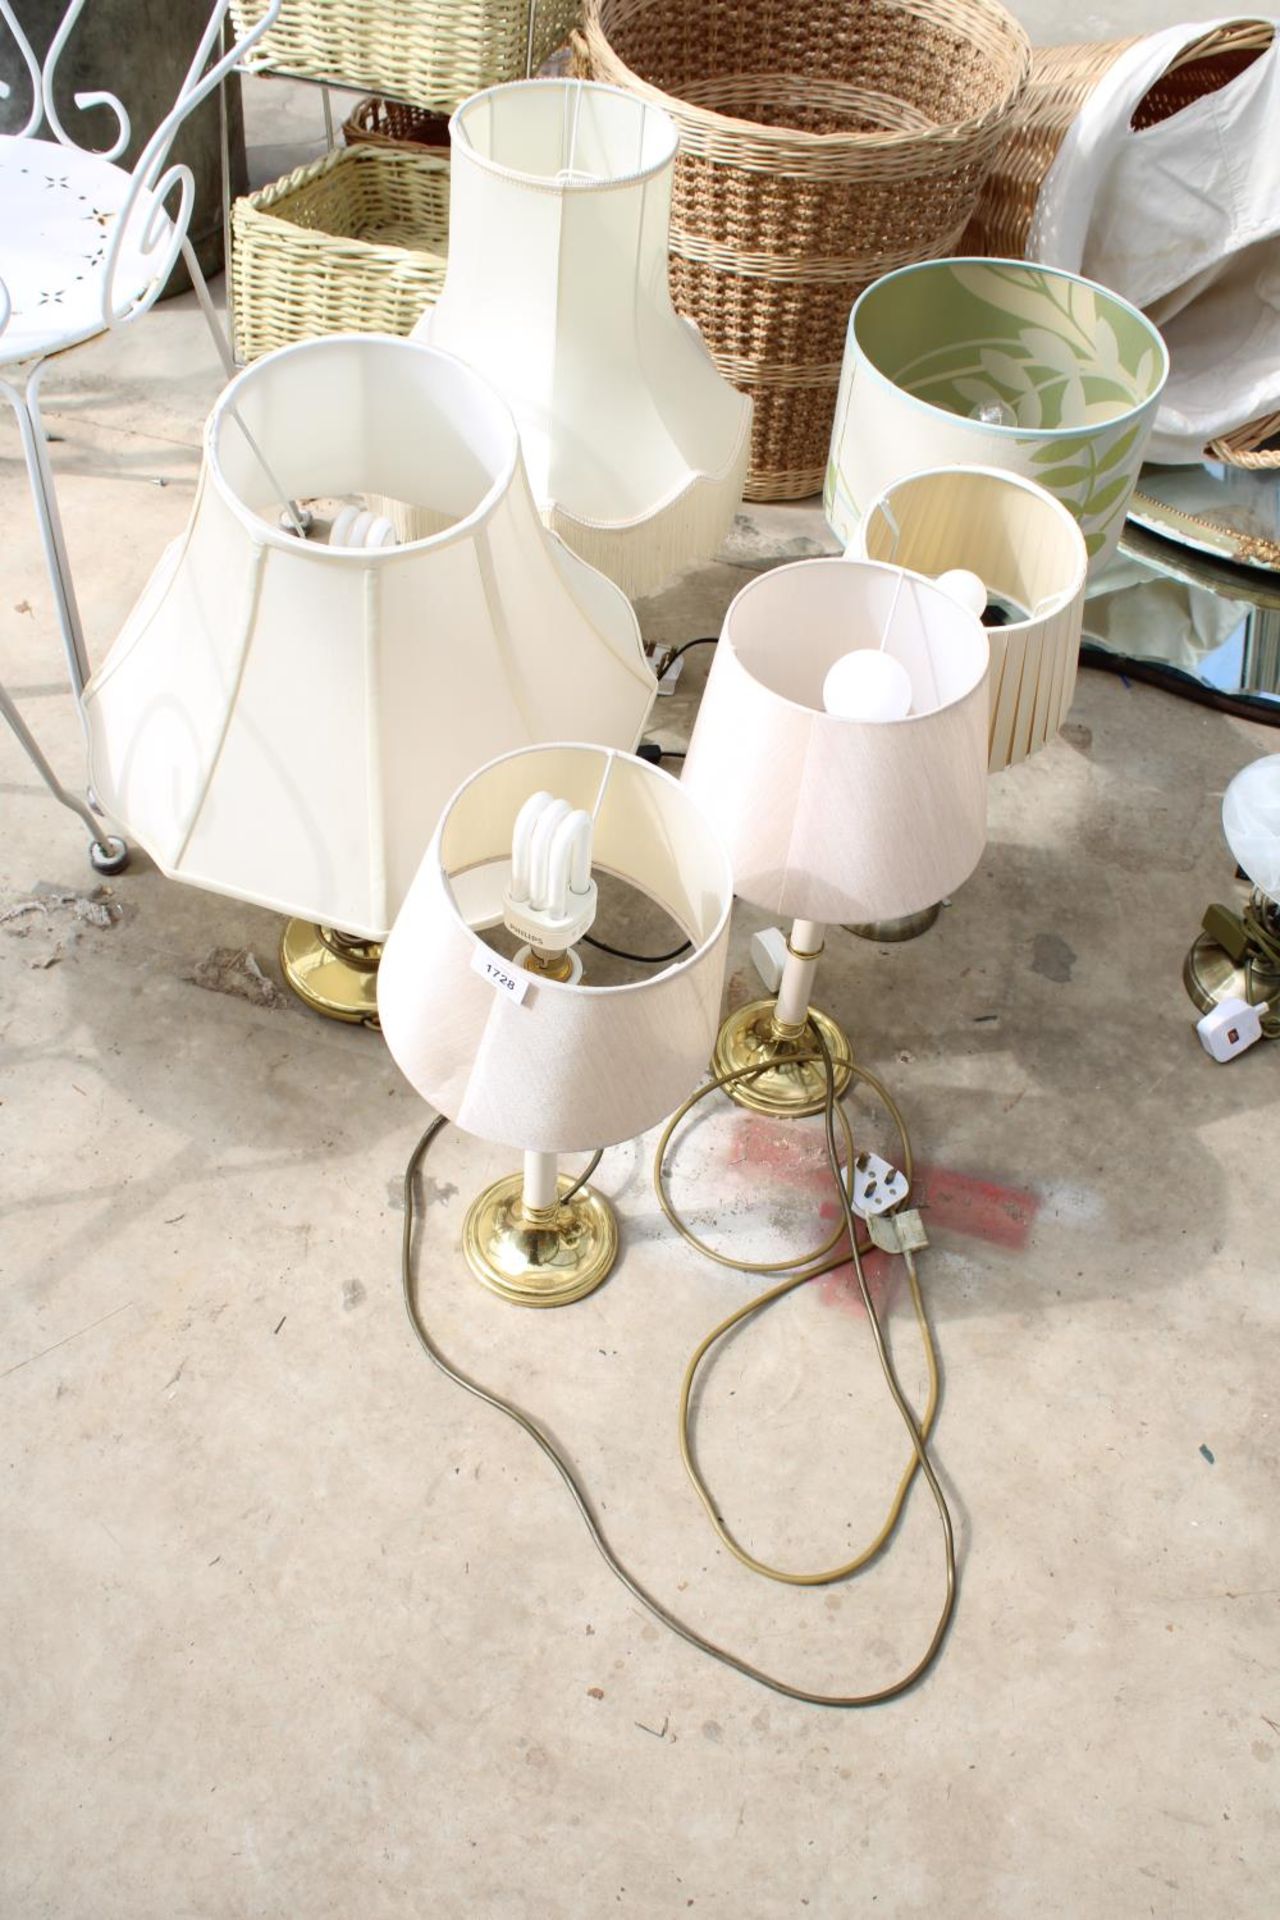 SIX VARIOUS TABLE LAMPS WITH SHADES